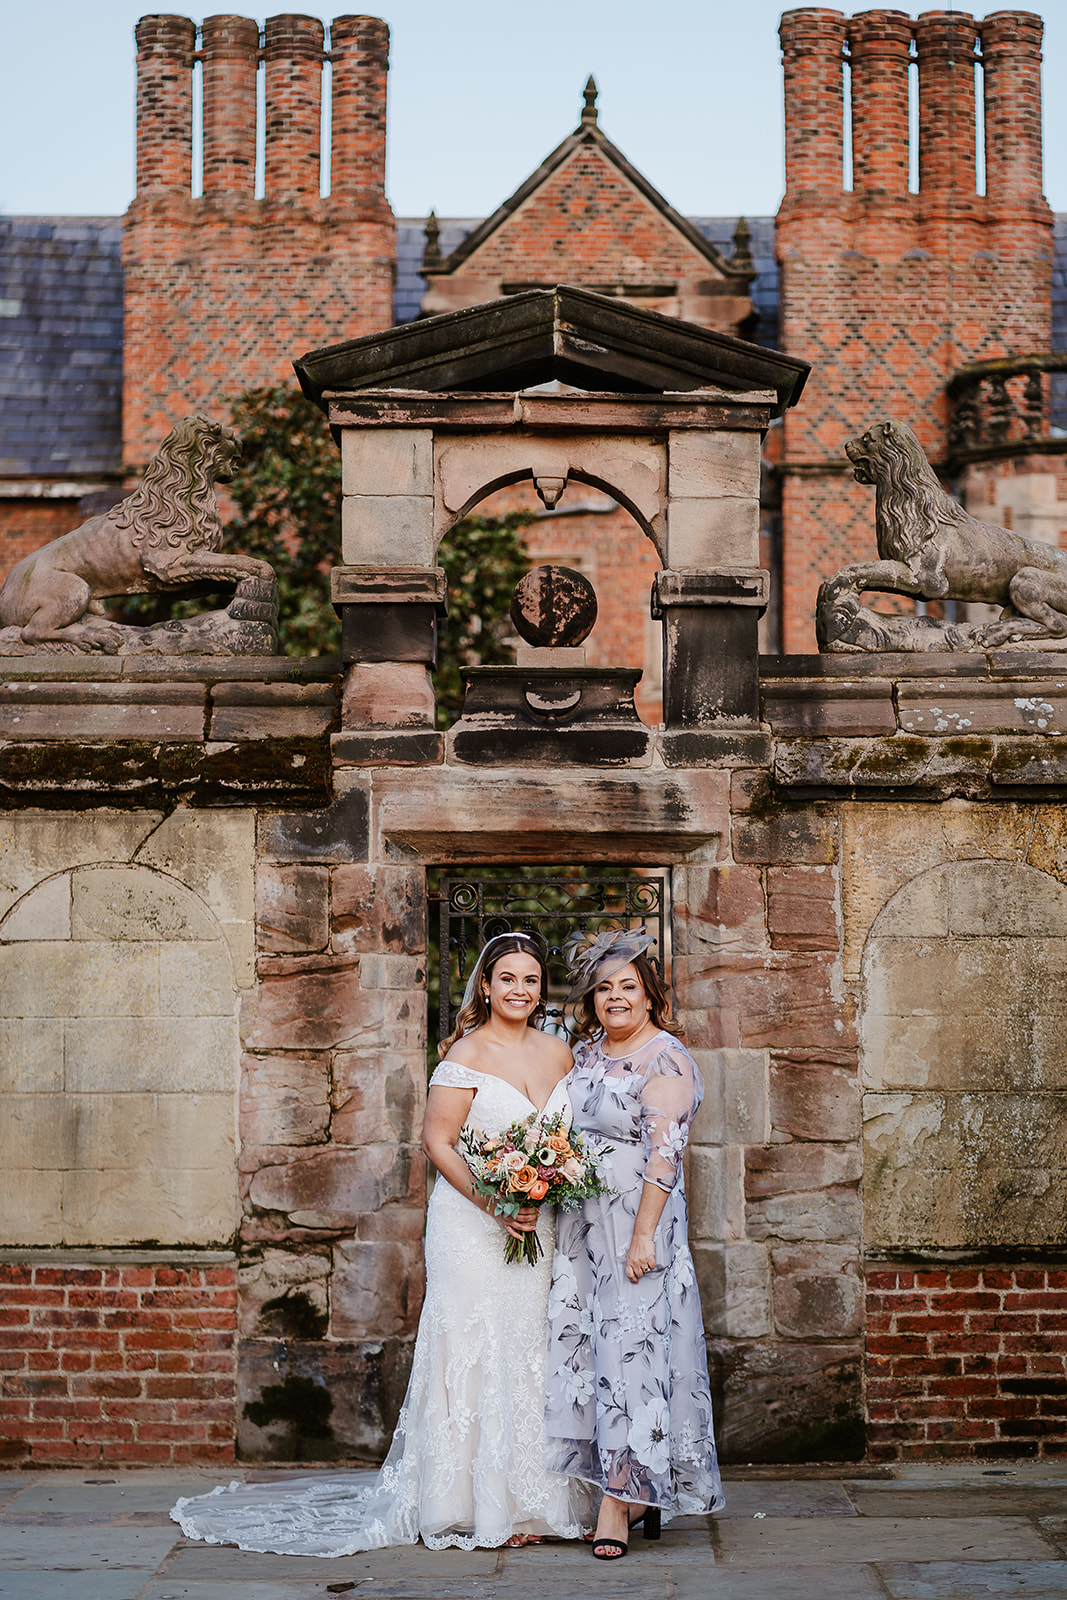 Bride and mother pose in front of ornate gate